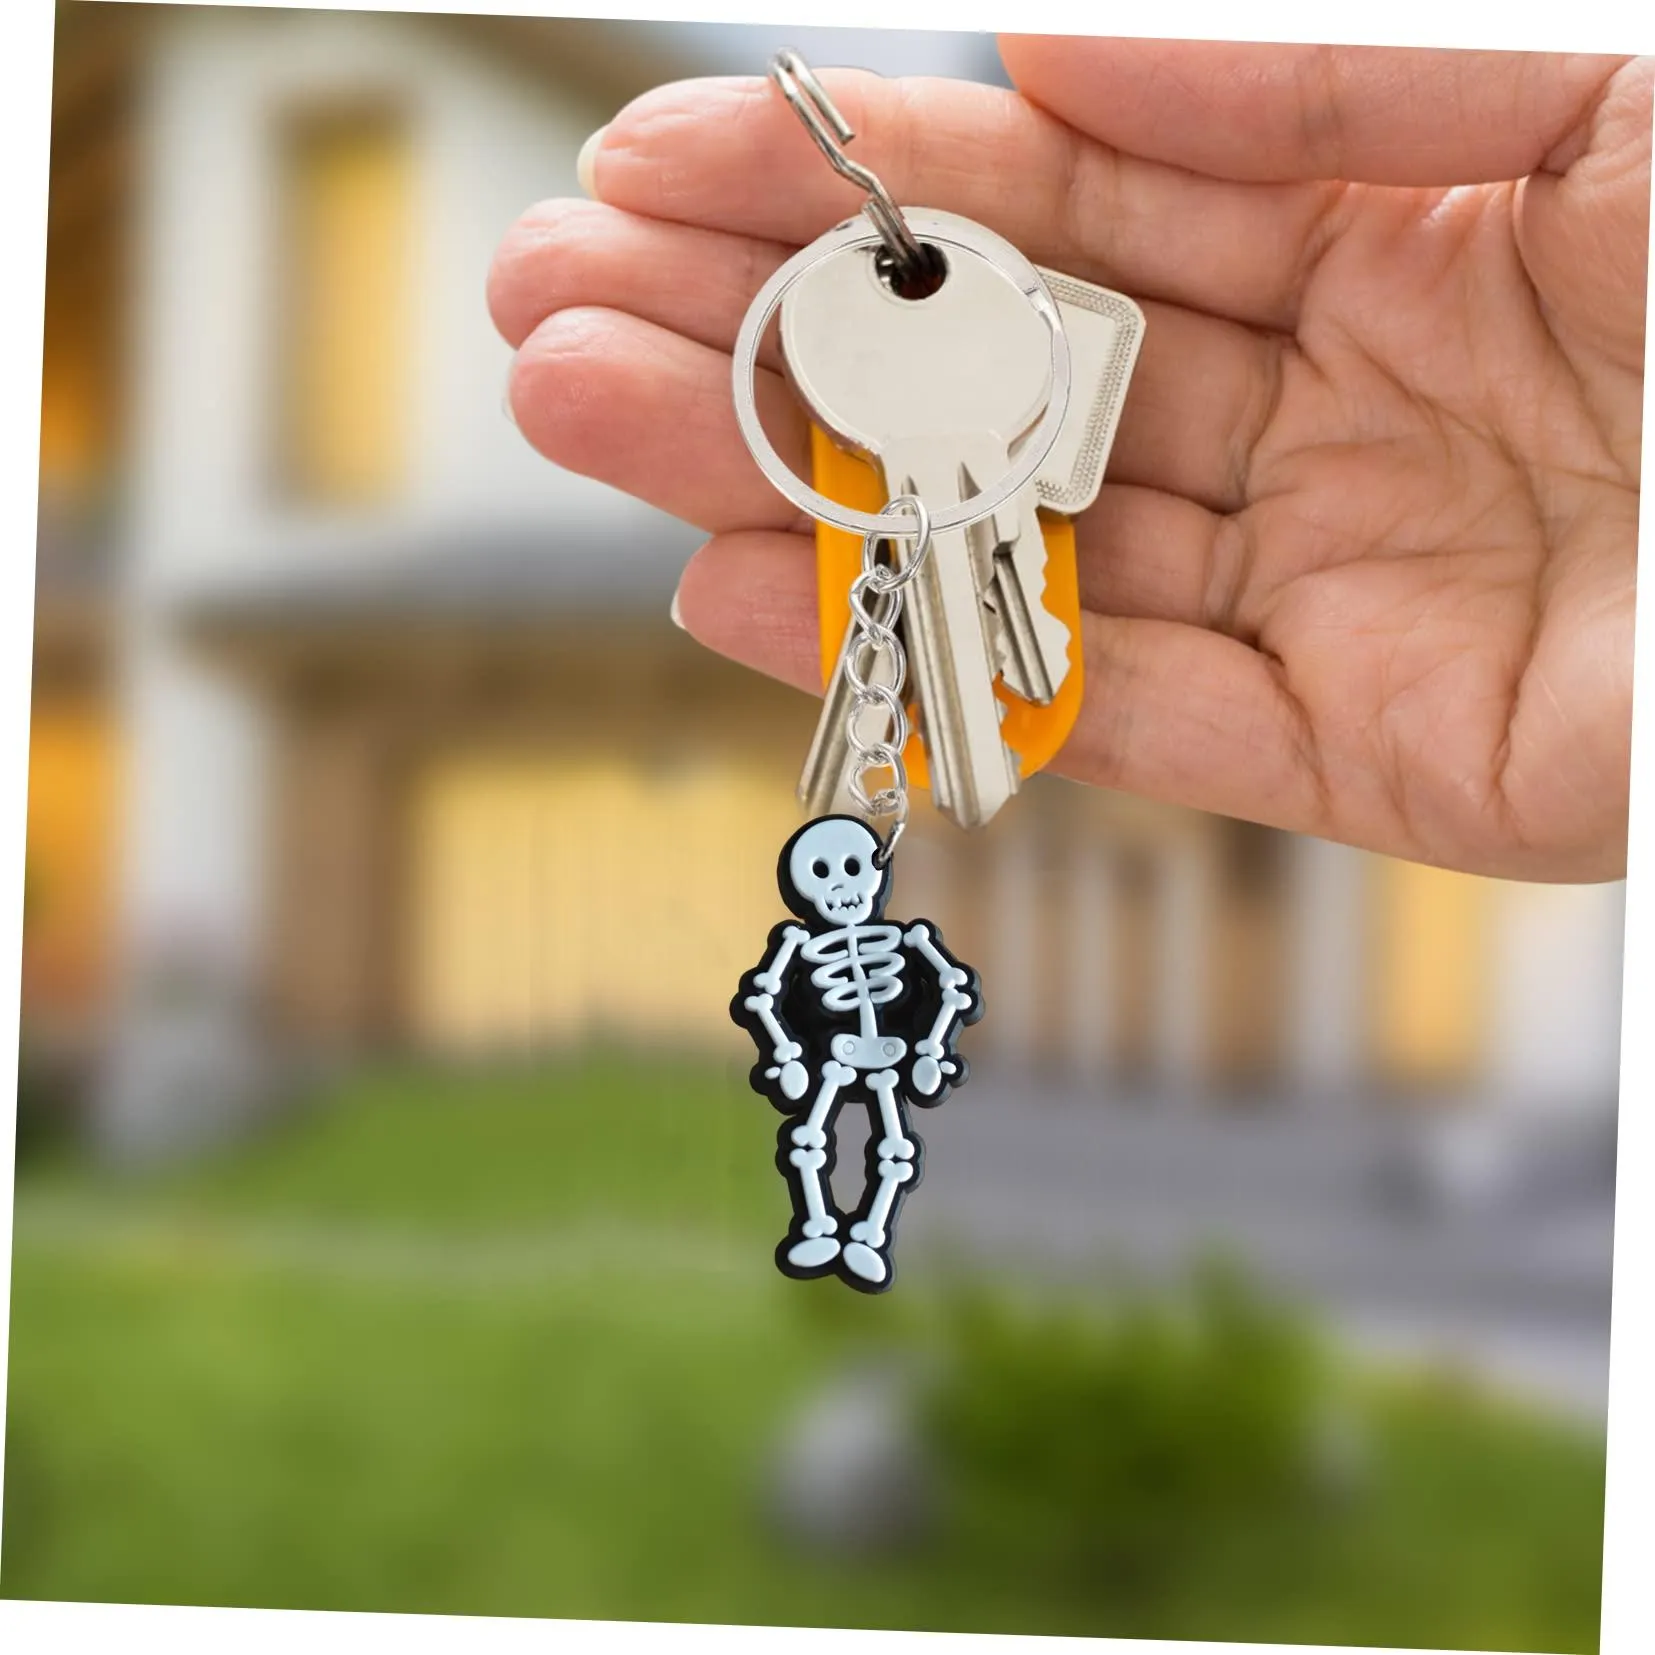 fluorescent skull head keychain key chain for party favors gift keychains tags goodie bag stuffer christmas gifts and holiday charms girls keyring suitable schoolbag backpack shoulder pendant accessories charm handbag car valentines day men